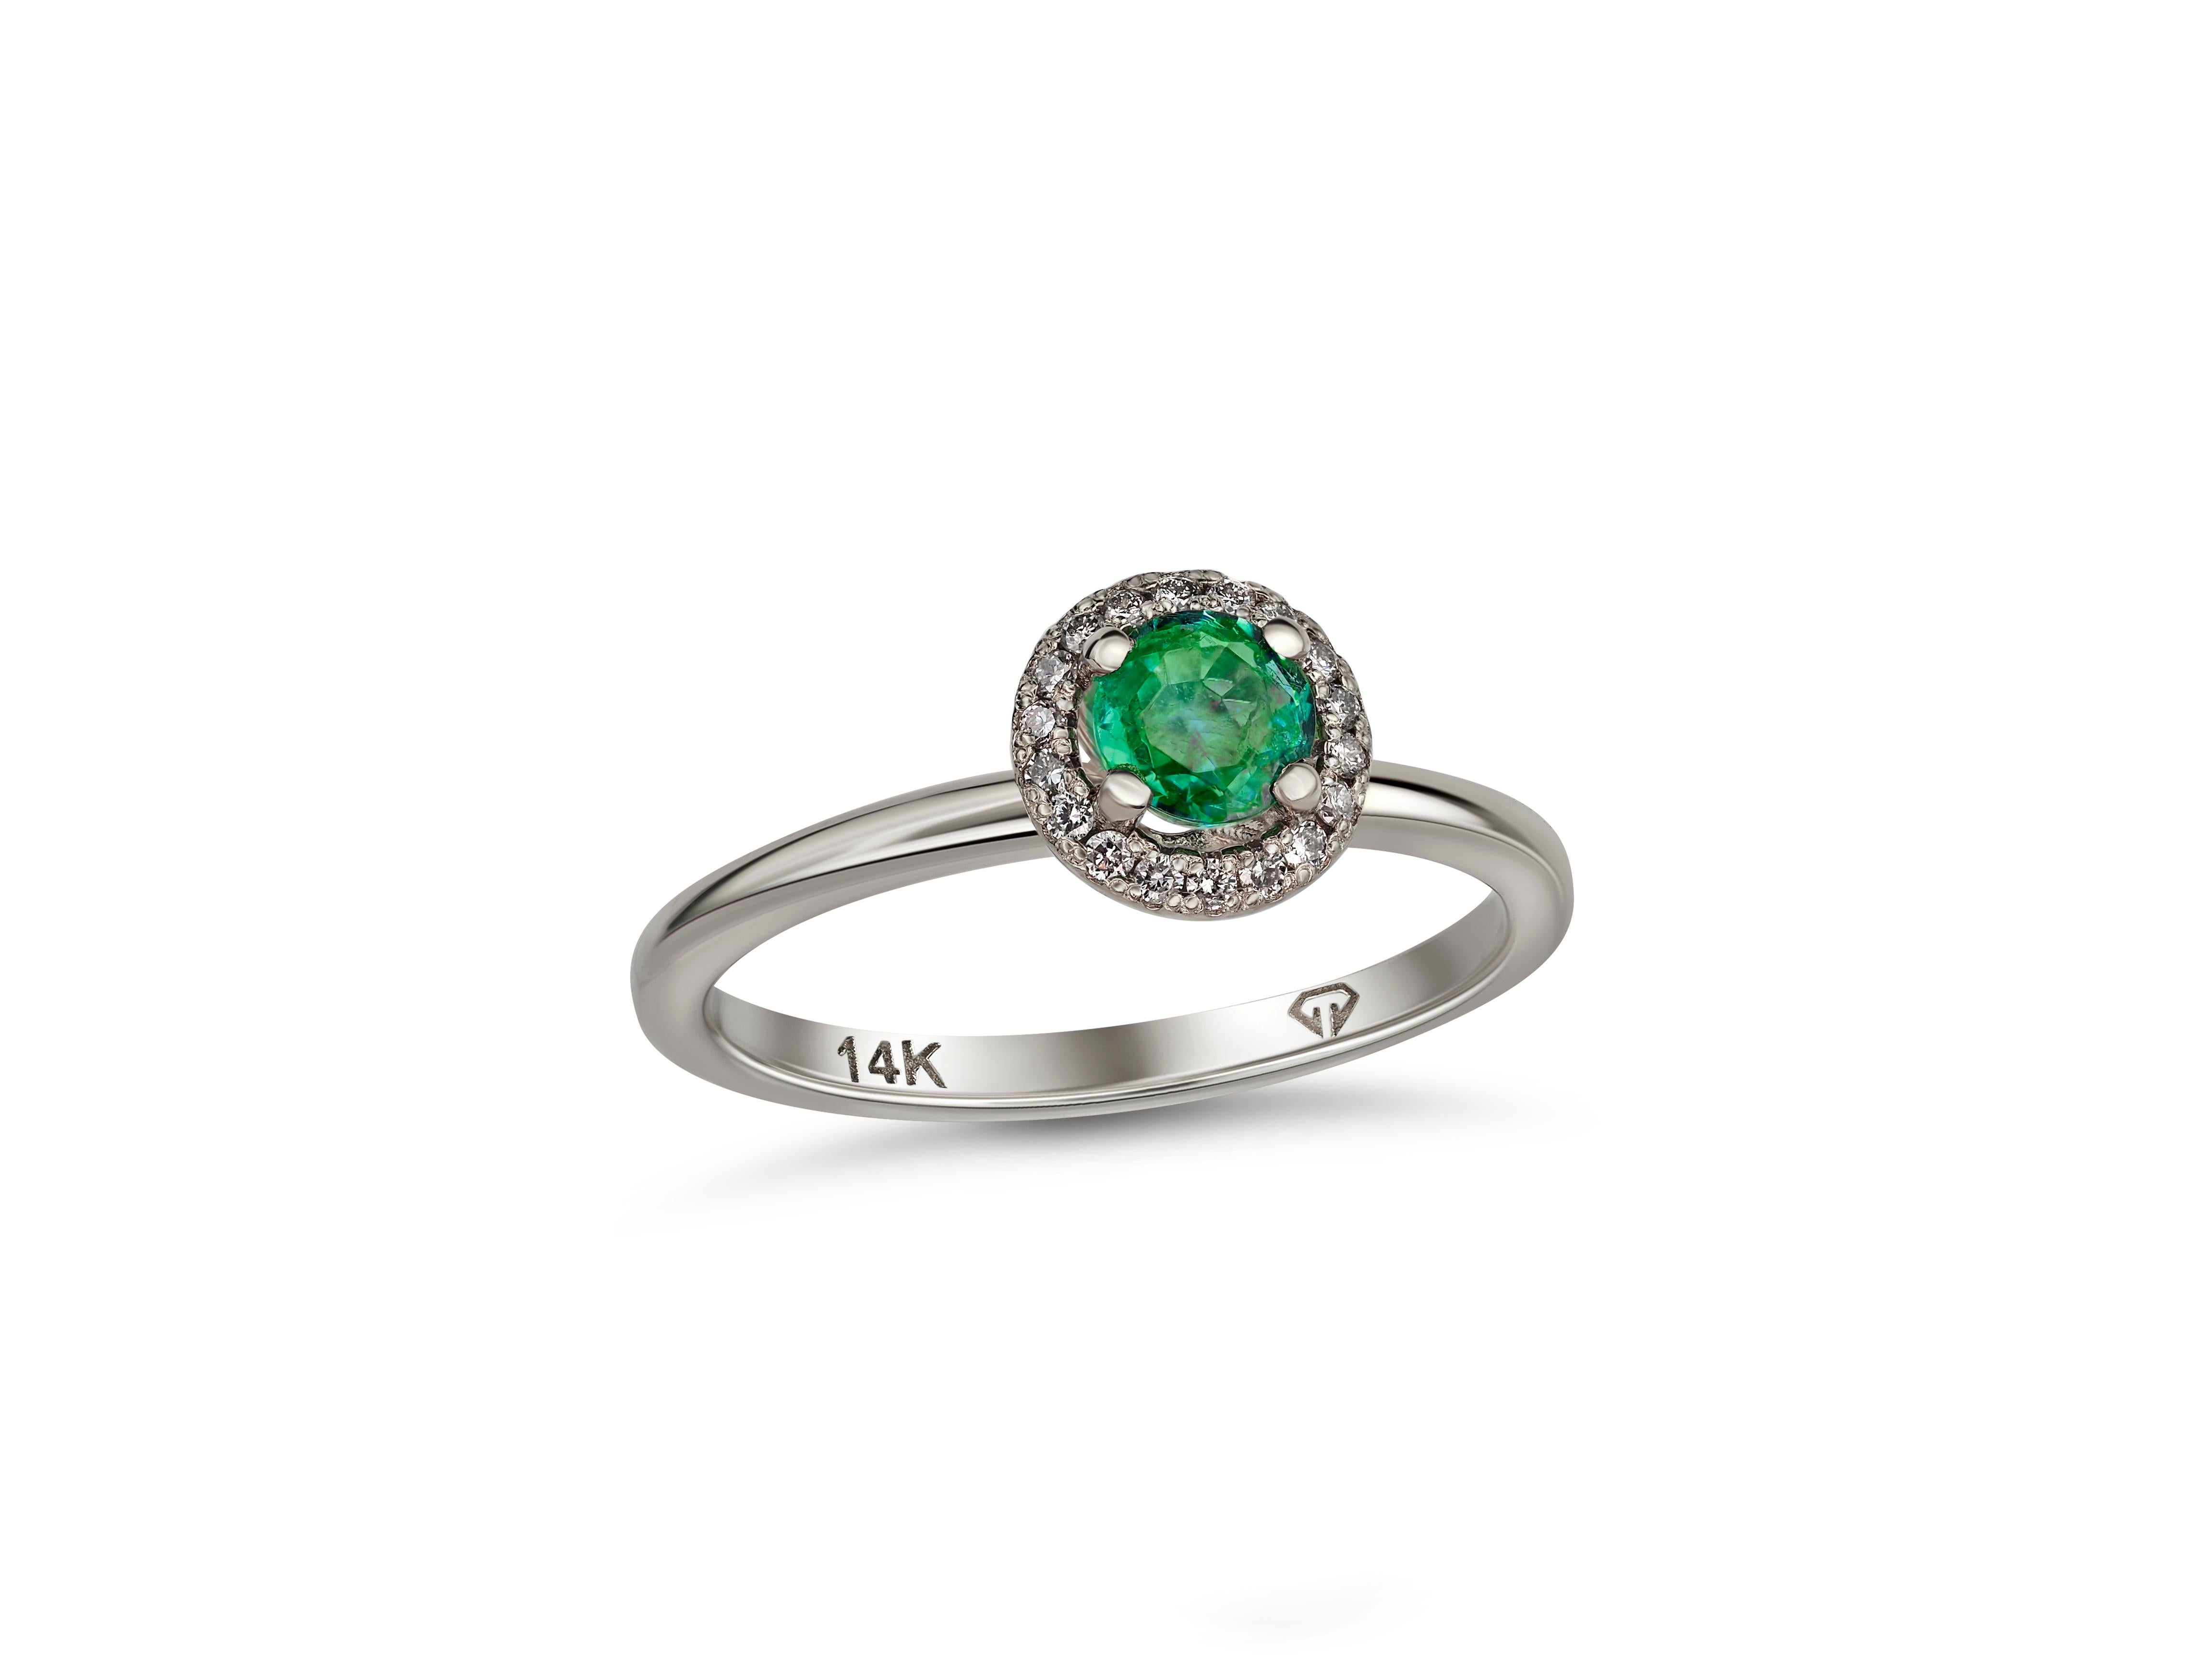 For Sale:  Emerald and Diamonds 14k gold ring.  Emerald Halo Gold Ring. 3